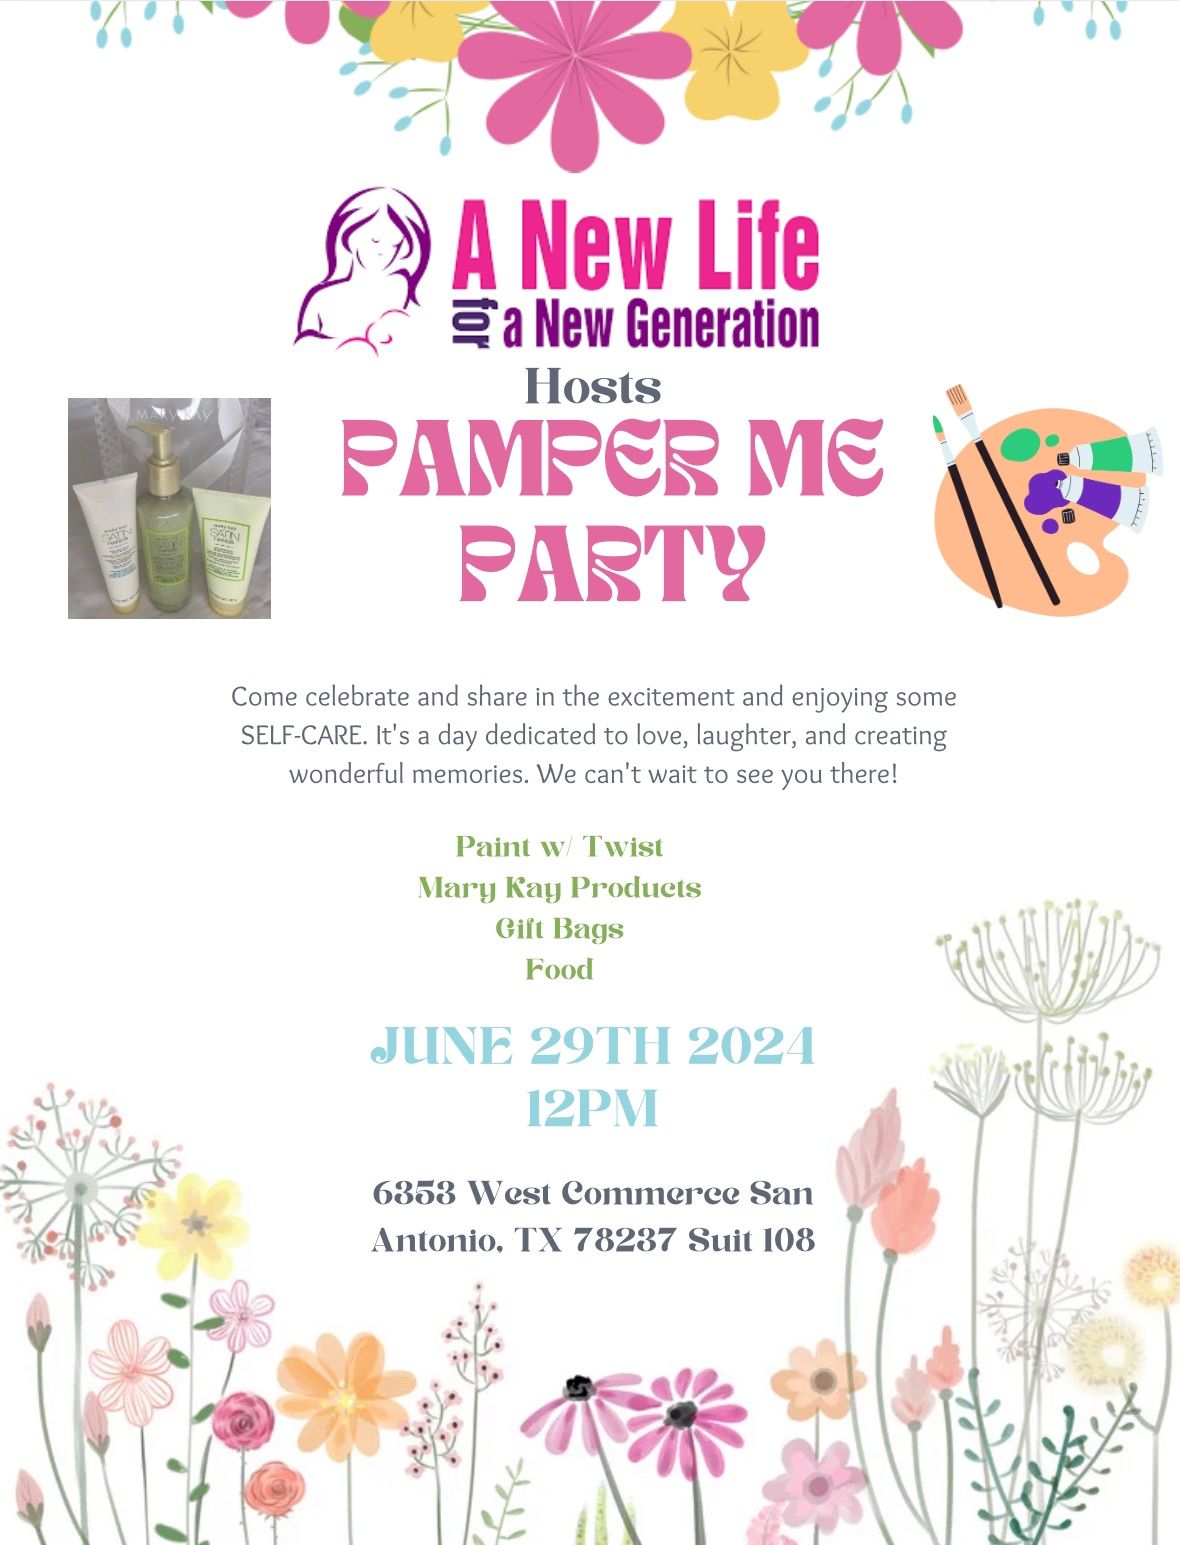 PAMPER ME PARTY